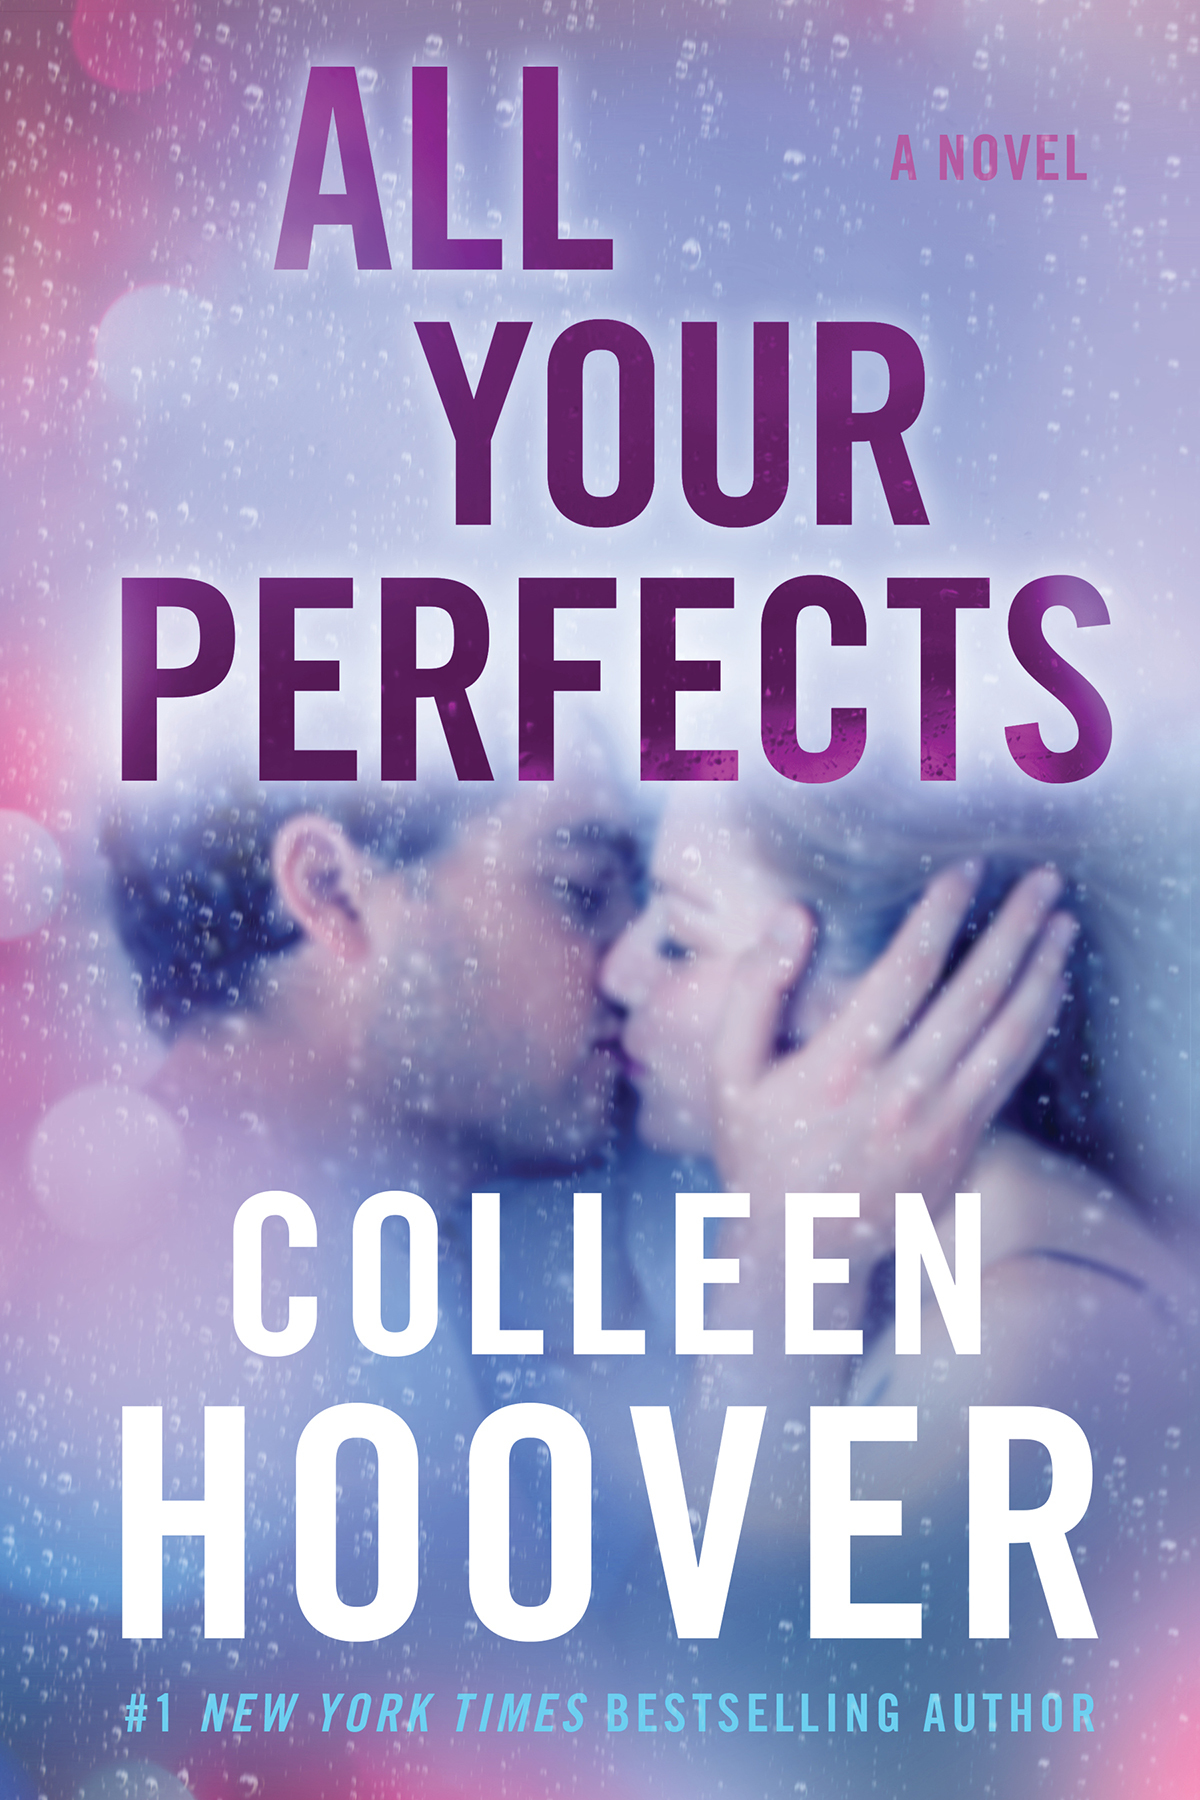 2. All Your Perfects by Colleen Hoover